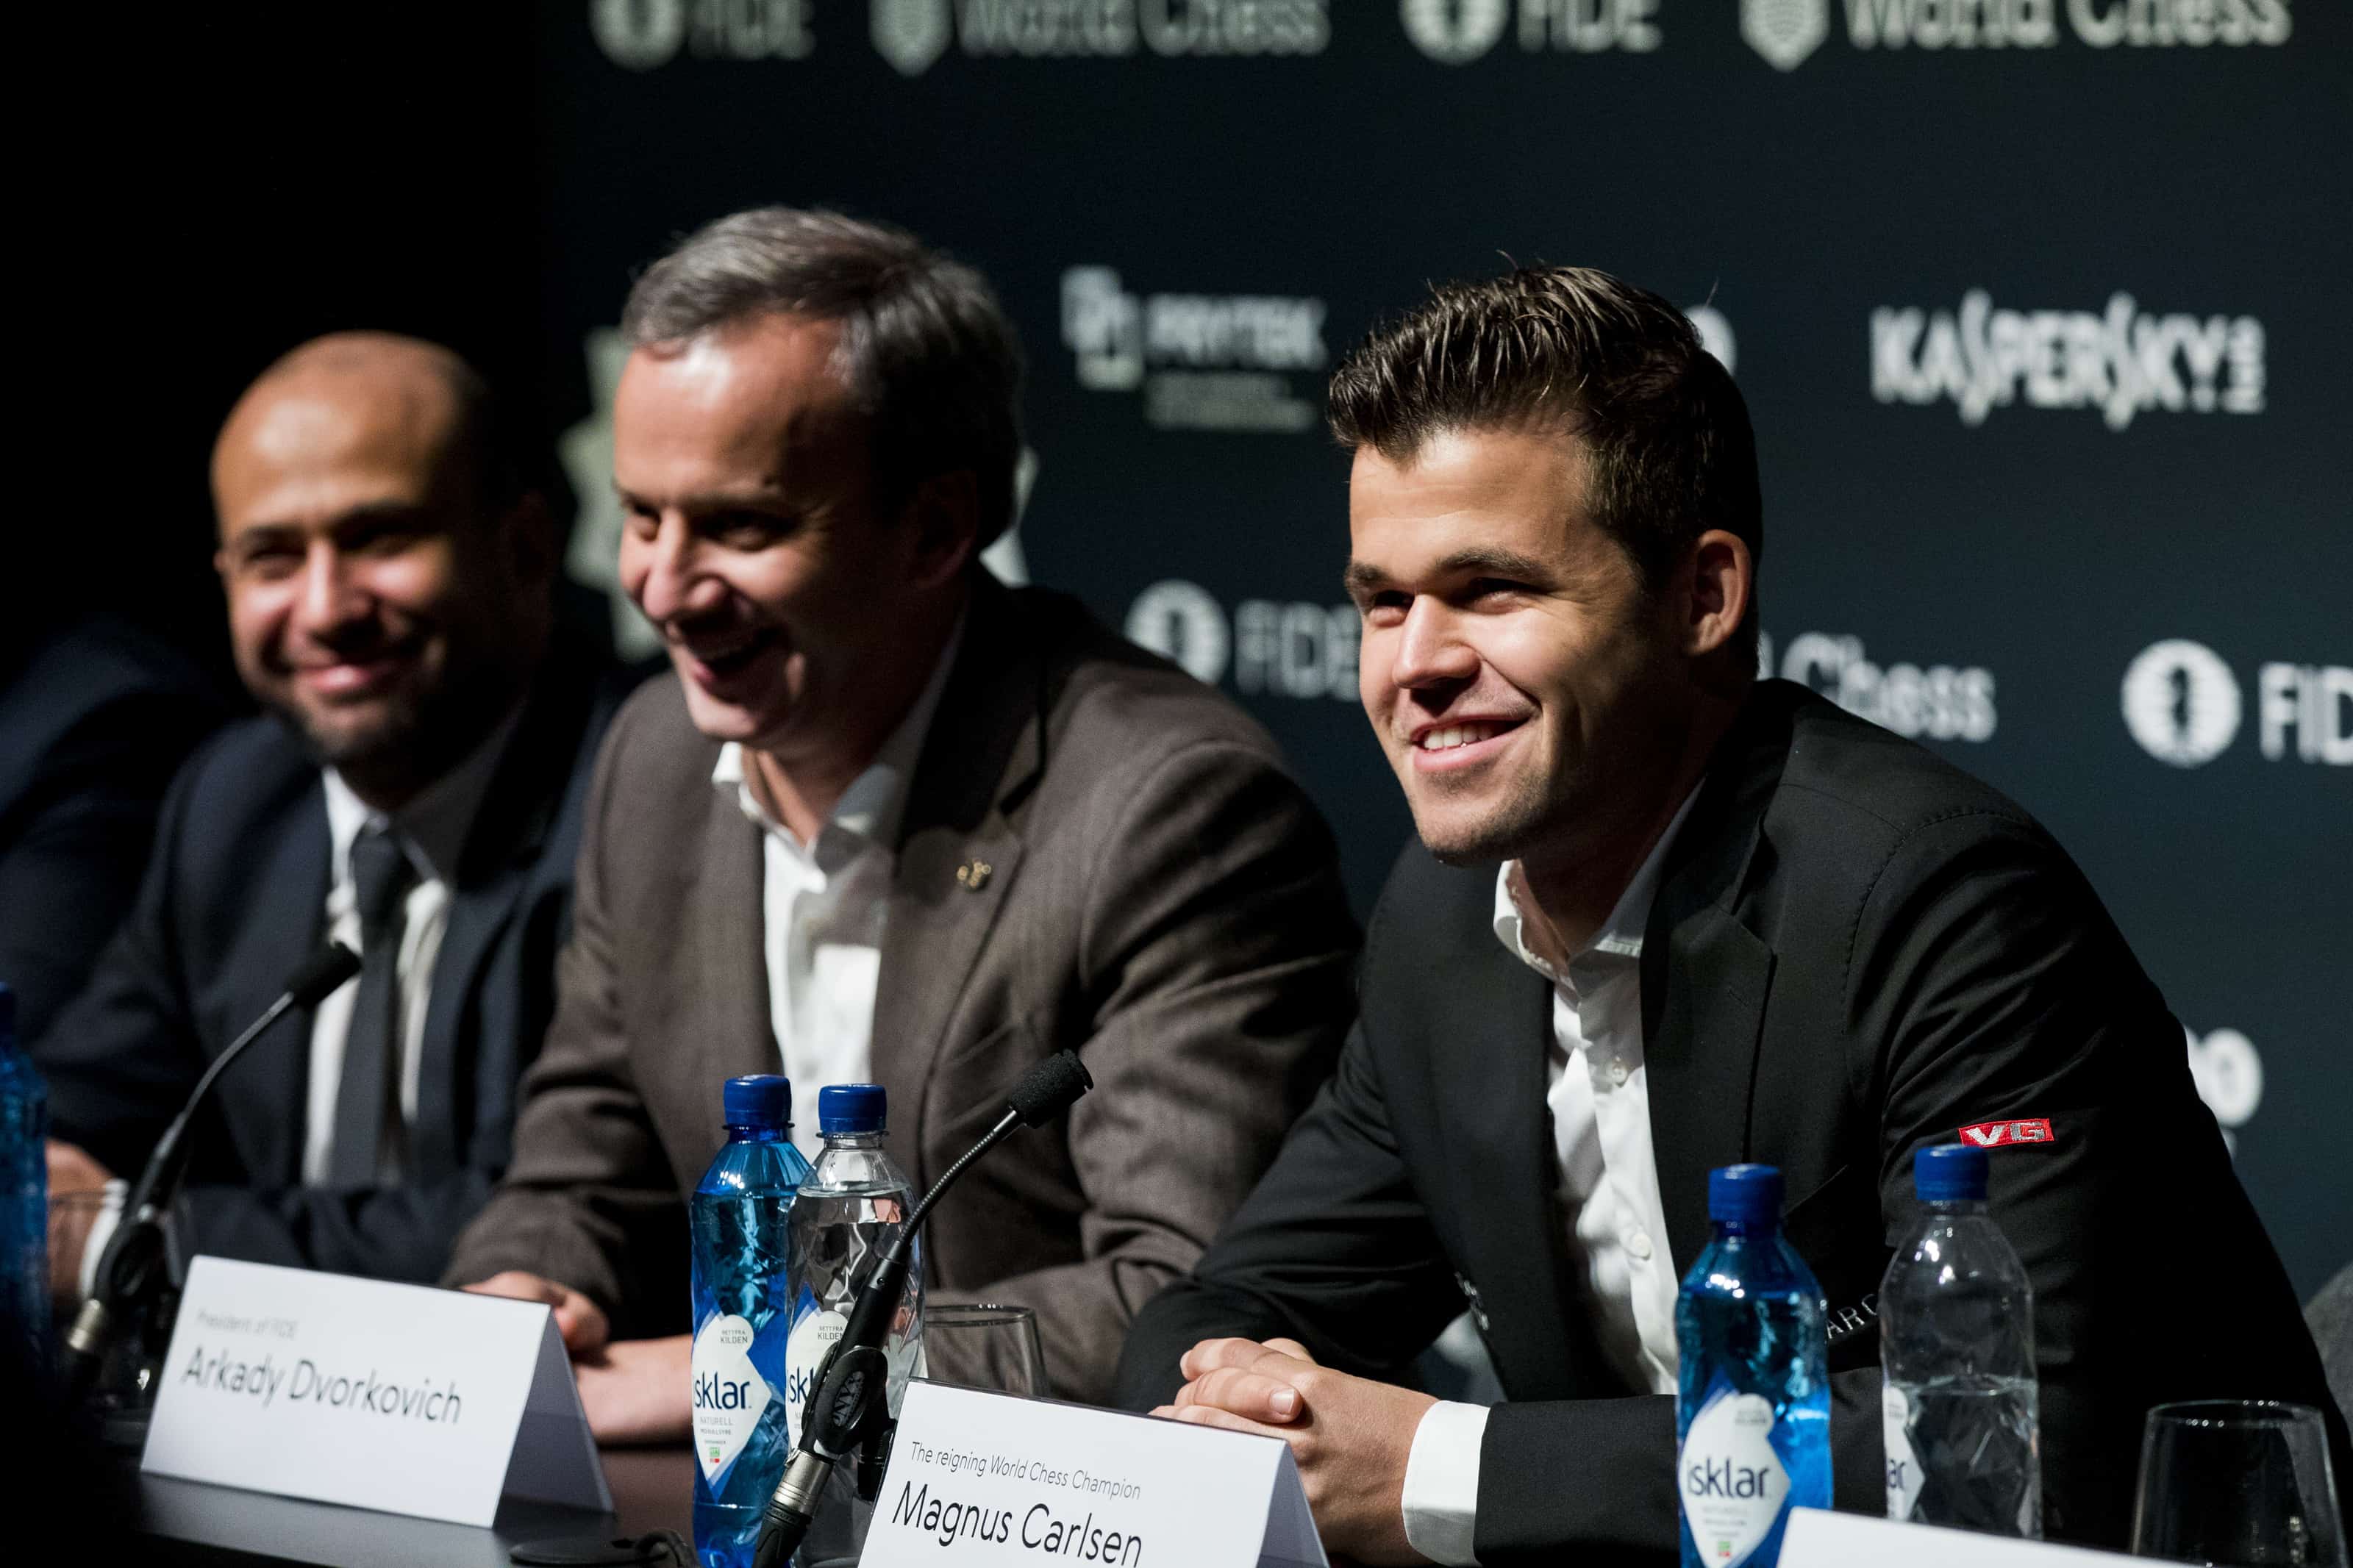 Magnus Carlsen jokes in the press conference